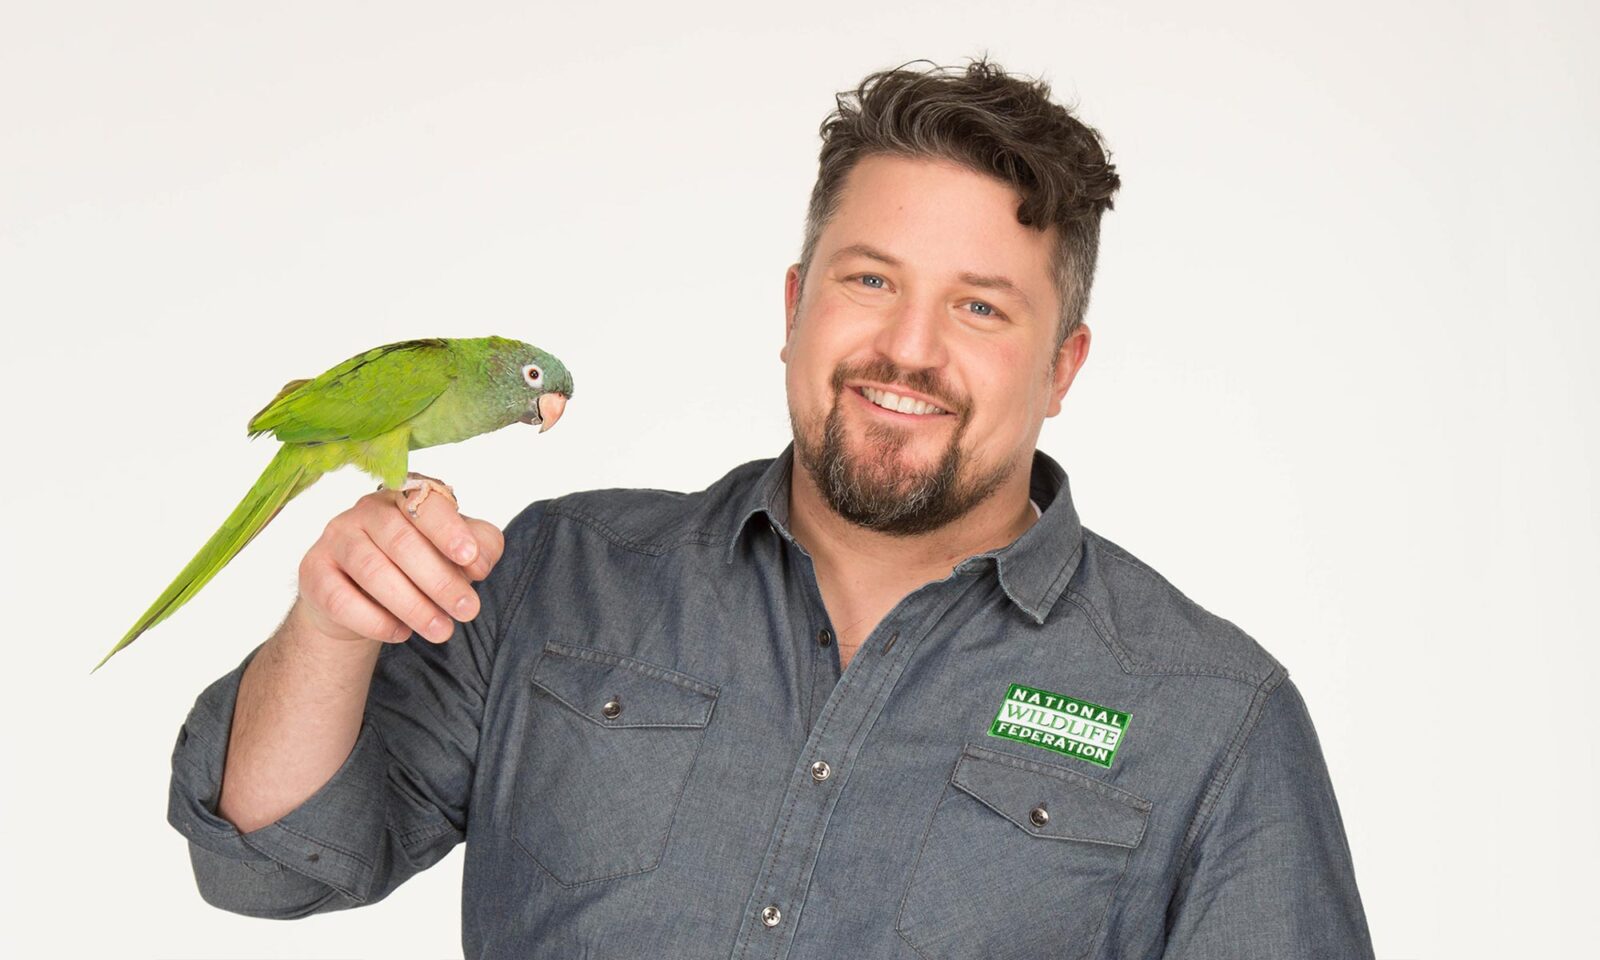 David Mizejewski holds a green parrot on a finger and smiles at the camera